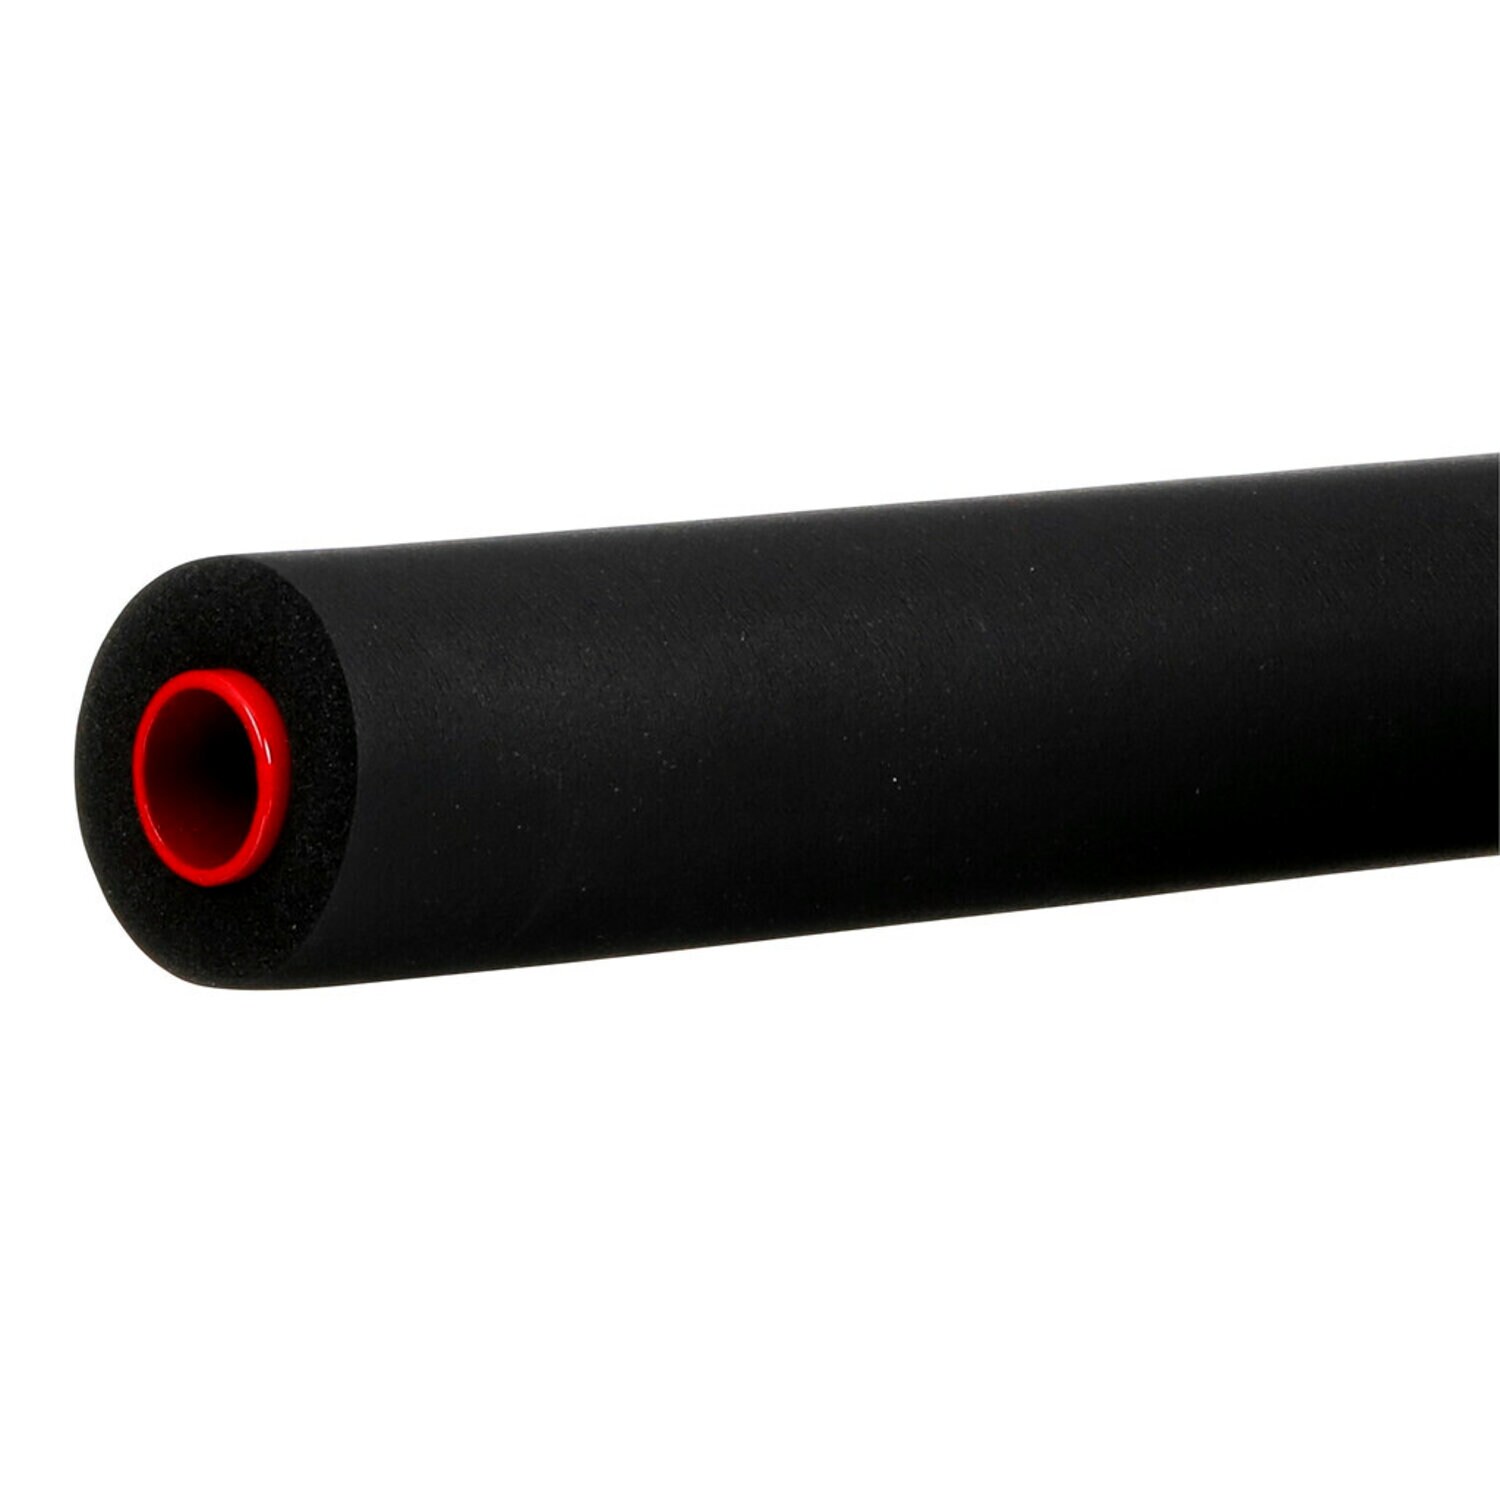 7100228226 - 3M Surface Protection Material Floor Applicator Foam Roller 36868, 36 in, 1/Case